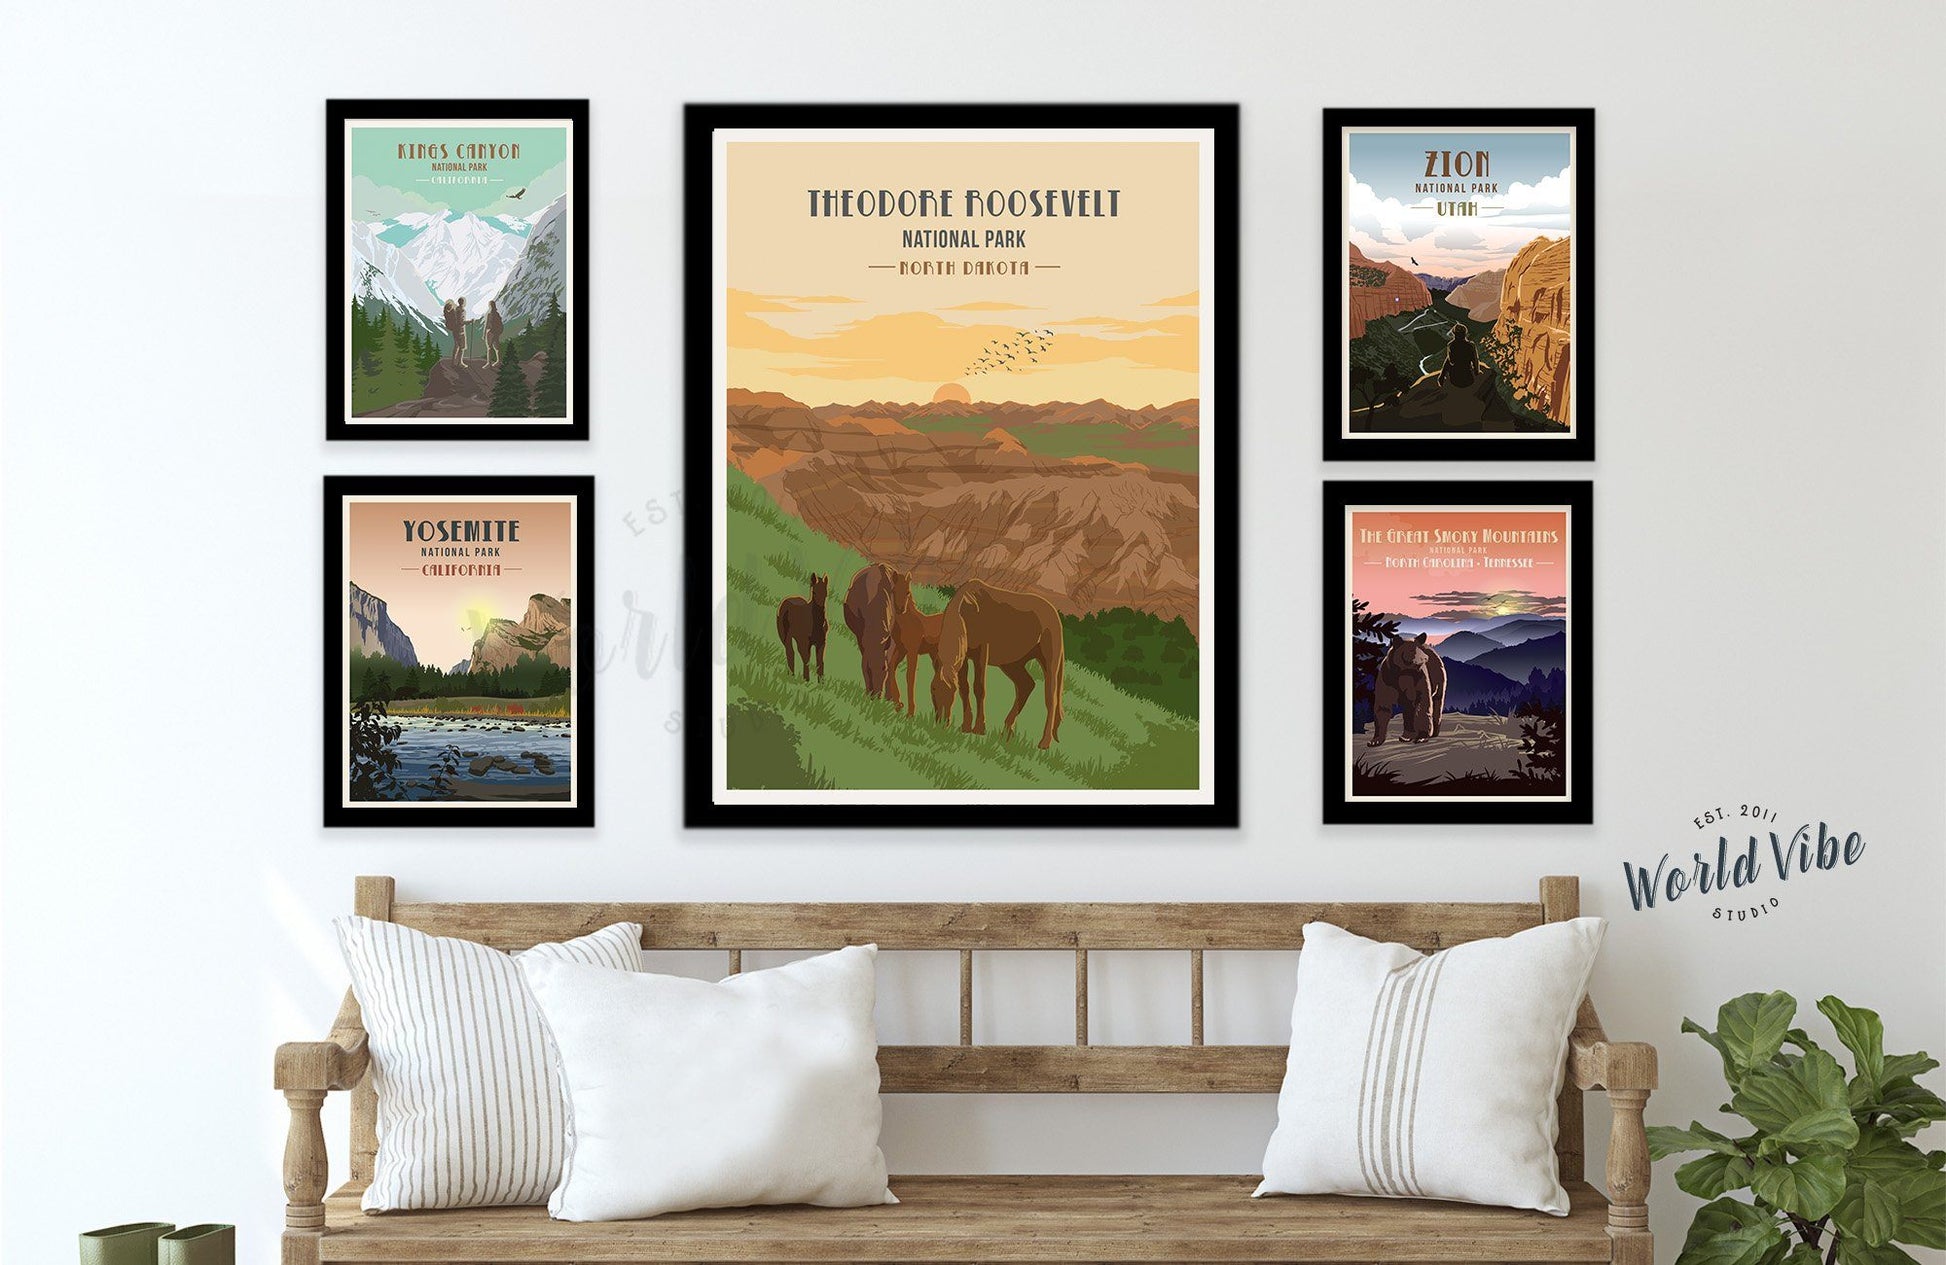 Kings Canyon National Park Poster, California, National Park Posters, Unframed Map World Vibe Studio 